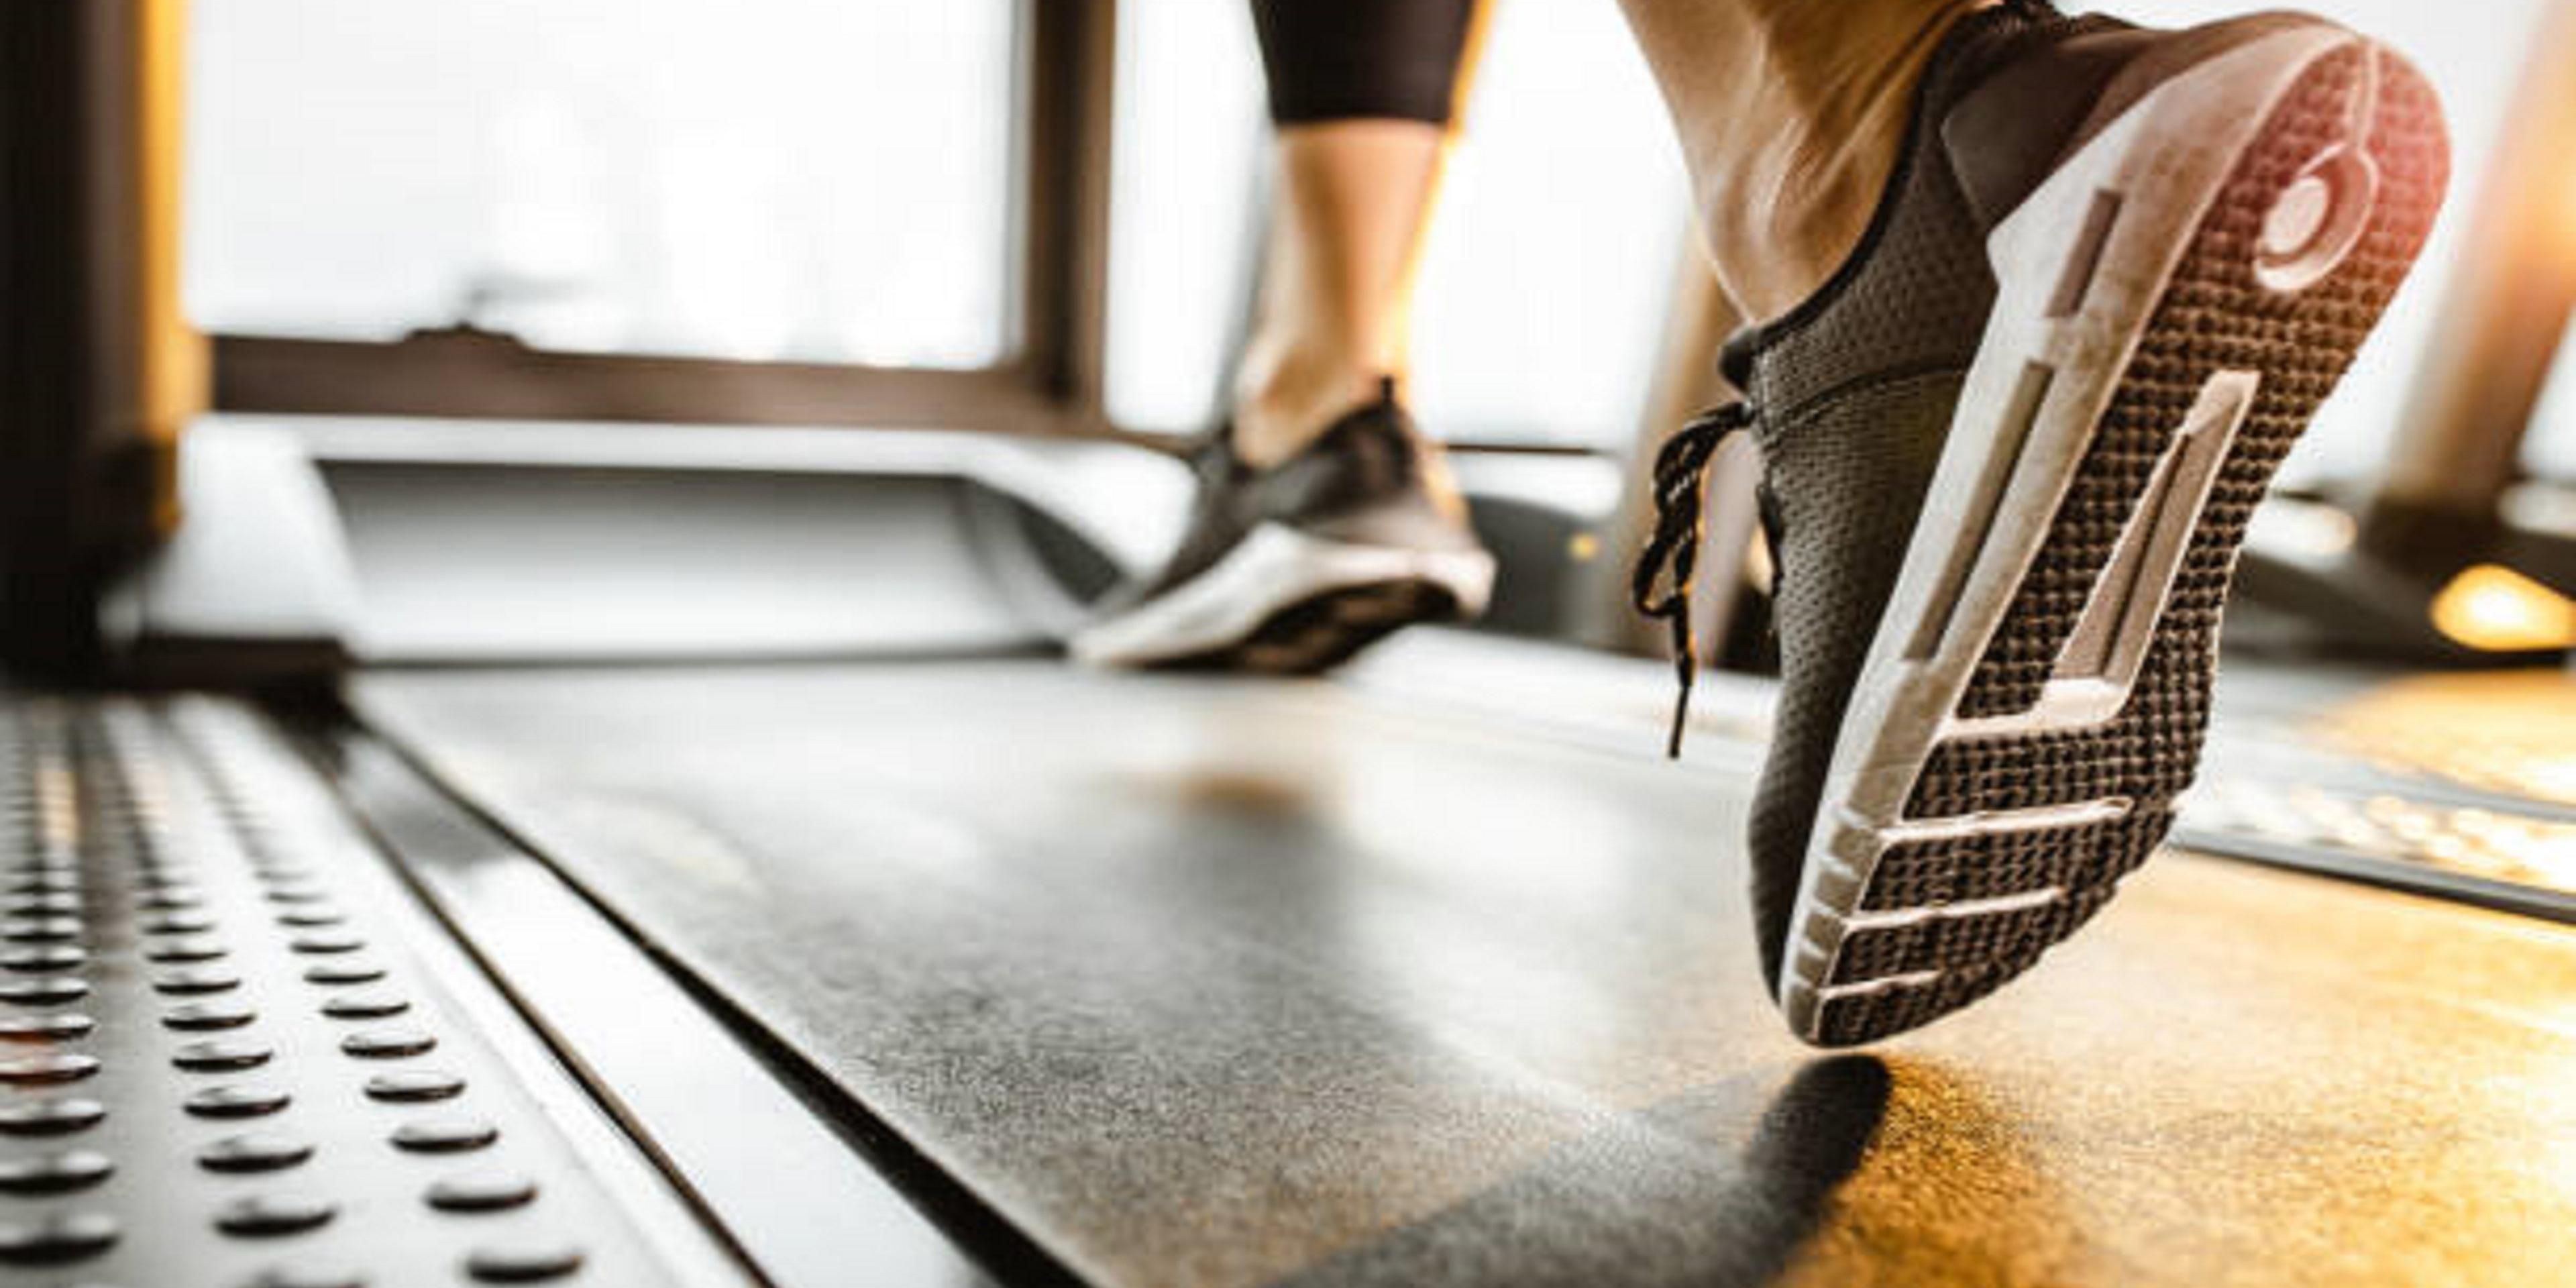 Get your sweat on in our complimentary, fully equipped fitness center with treadmill, elliptical machines, free weights and stationary bicycle.